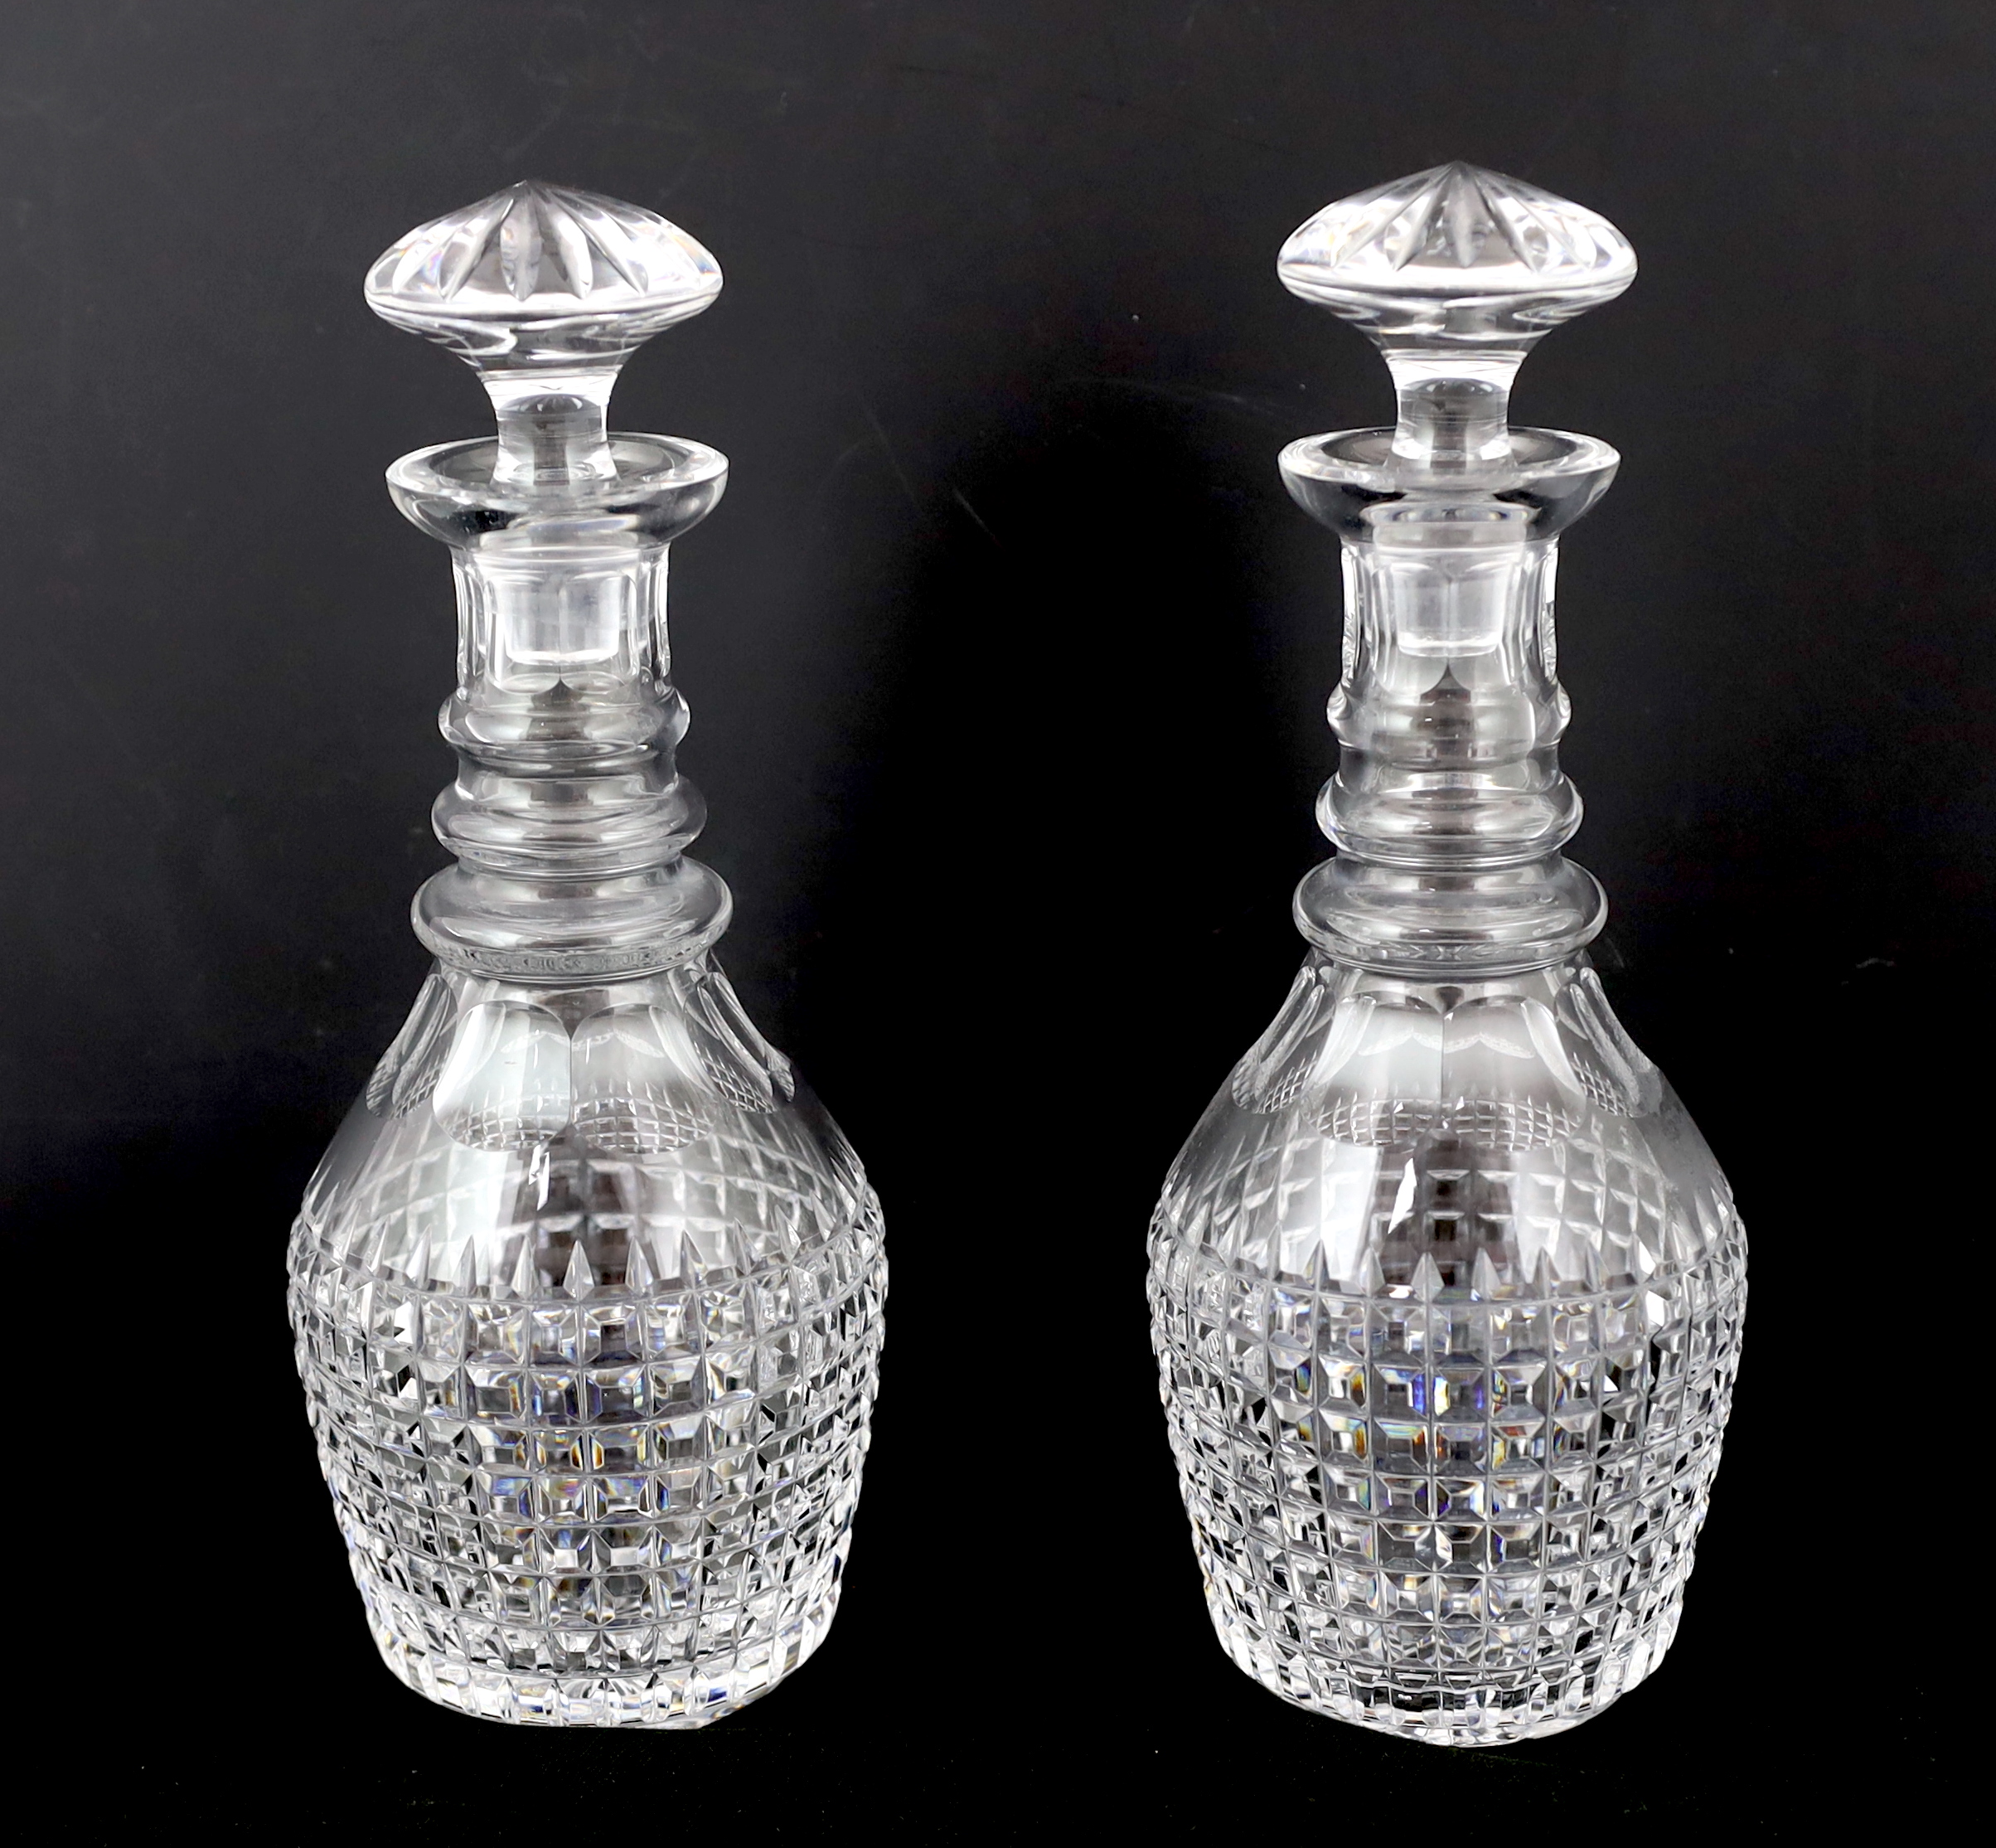 A pair Regency-style hob-nail cut glass decanters and stoppers, c.1900, Please note this lot attracts an additional import tax of 5% on the hammer price